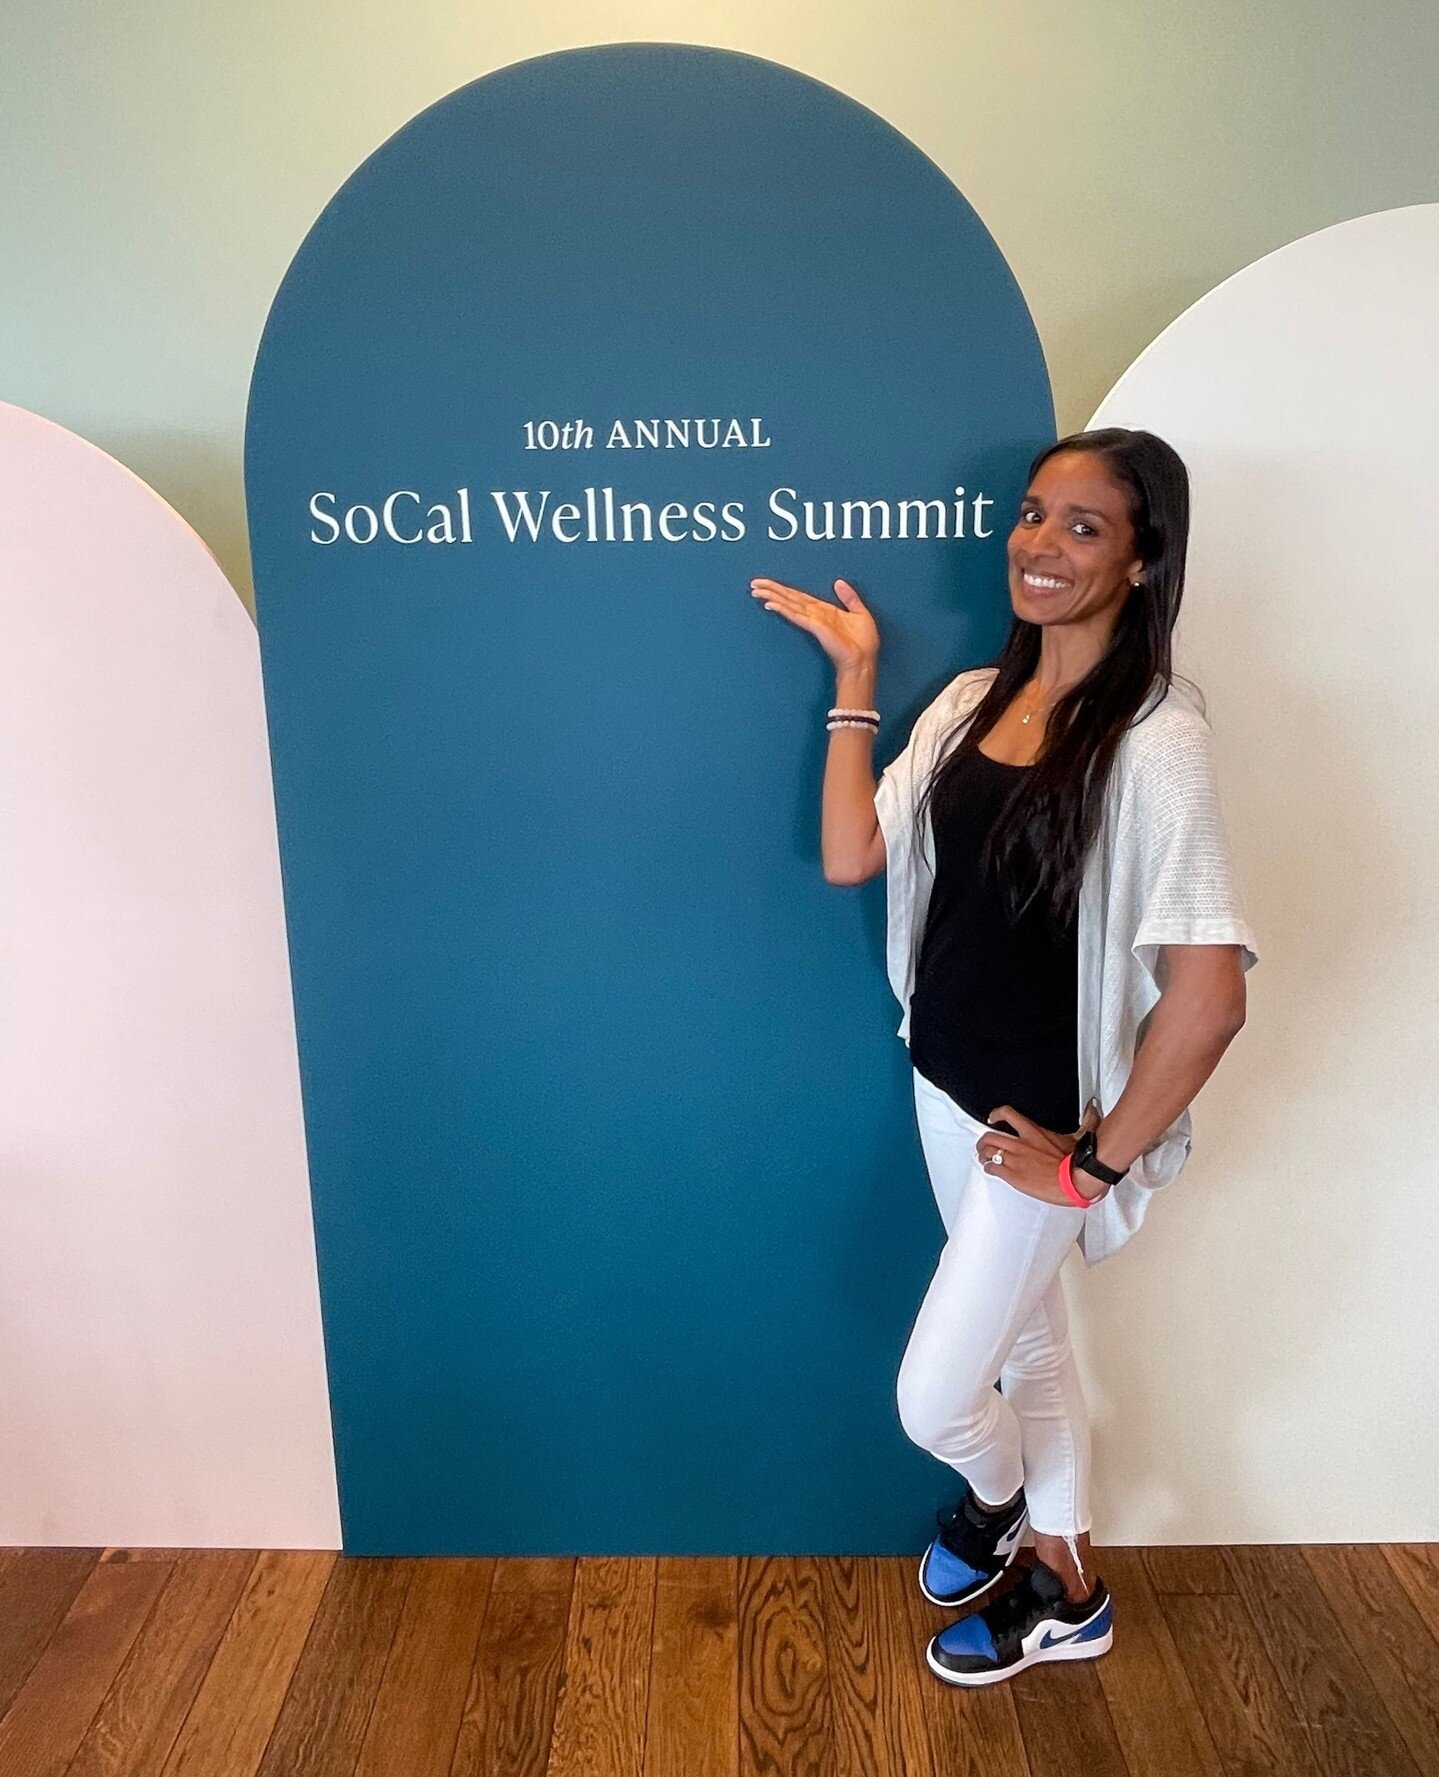 I don't know about you, but I love an in-person event! Especially when it includes - and is for - amazing women committed to elevating the wellness world. ⁠
⁠
It was an honor speaking on the Modern Mental Health panel at the SoCal Wellness Summit las